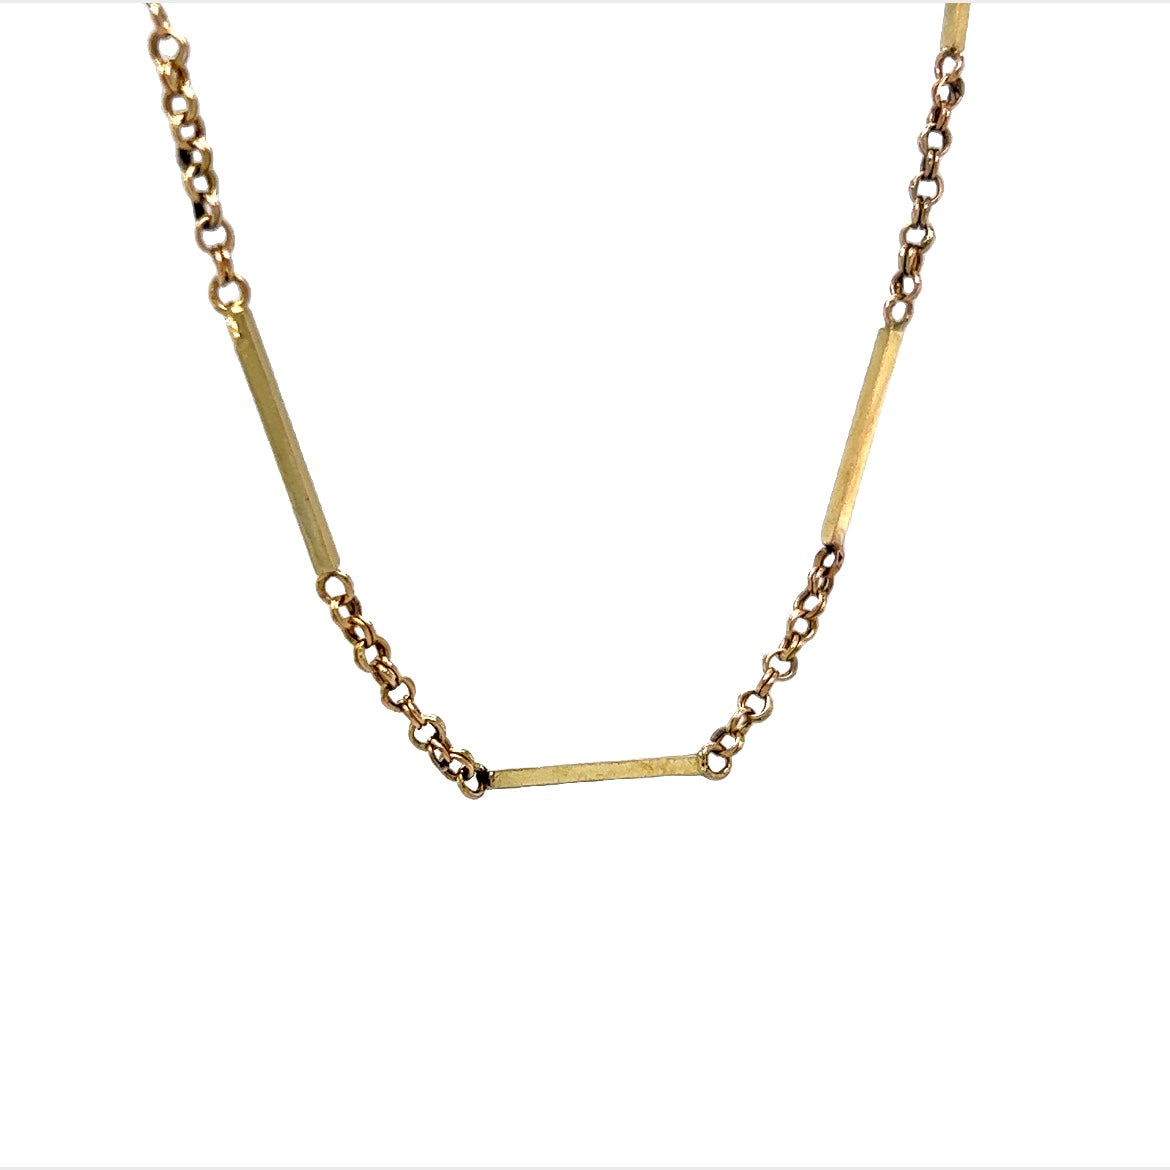 Homxi Chain Necklace Men,Men Necklace Chain 3mm 16 inch Link Chain Necklace  Box Chain with White Cubic Zirconia Alloy Chain Necklace Set Gold Chains  for Men Gold | Amazon.com